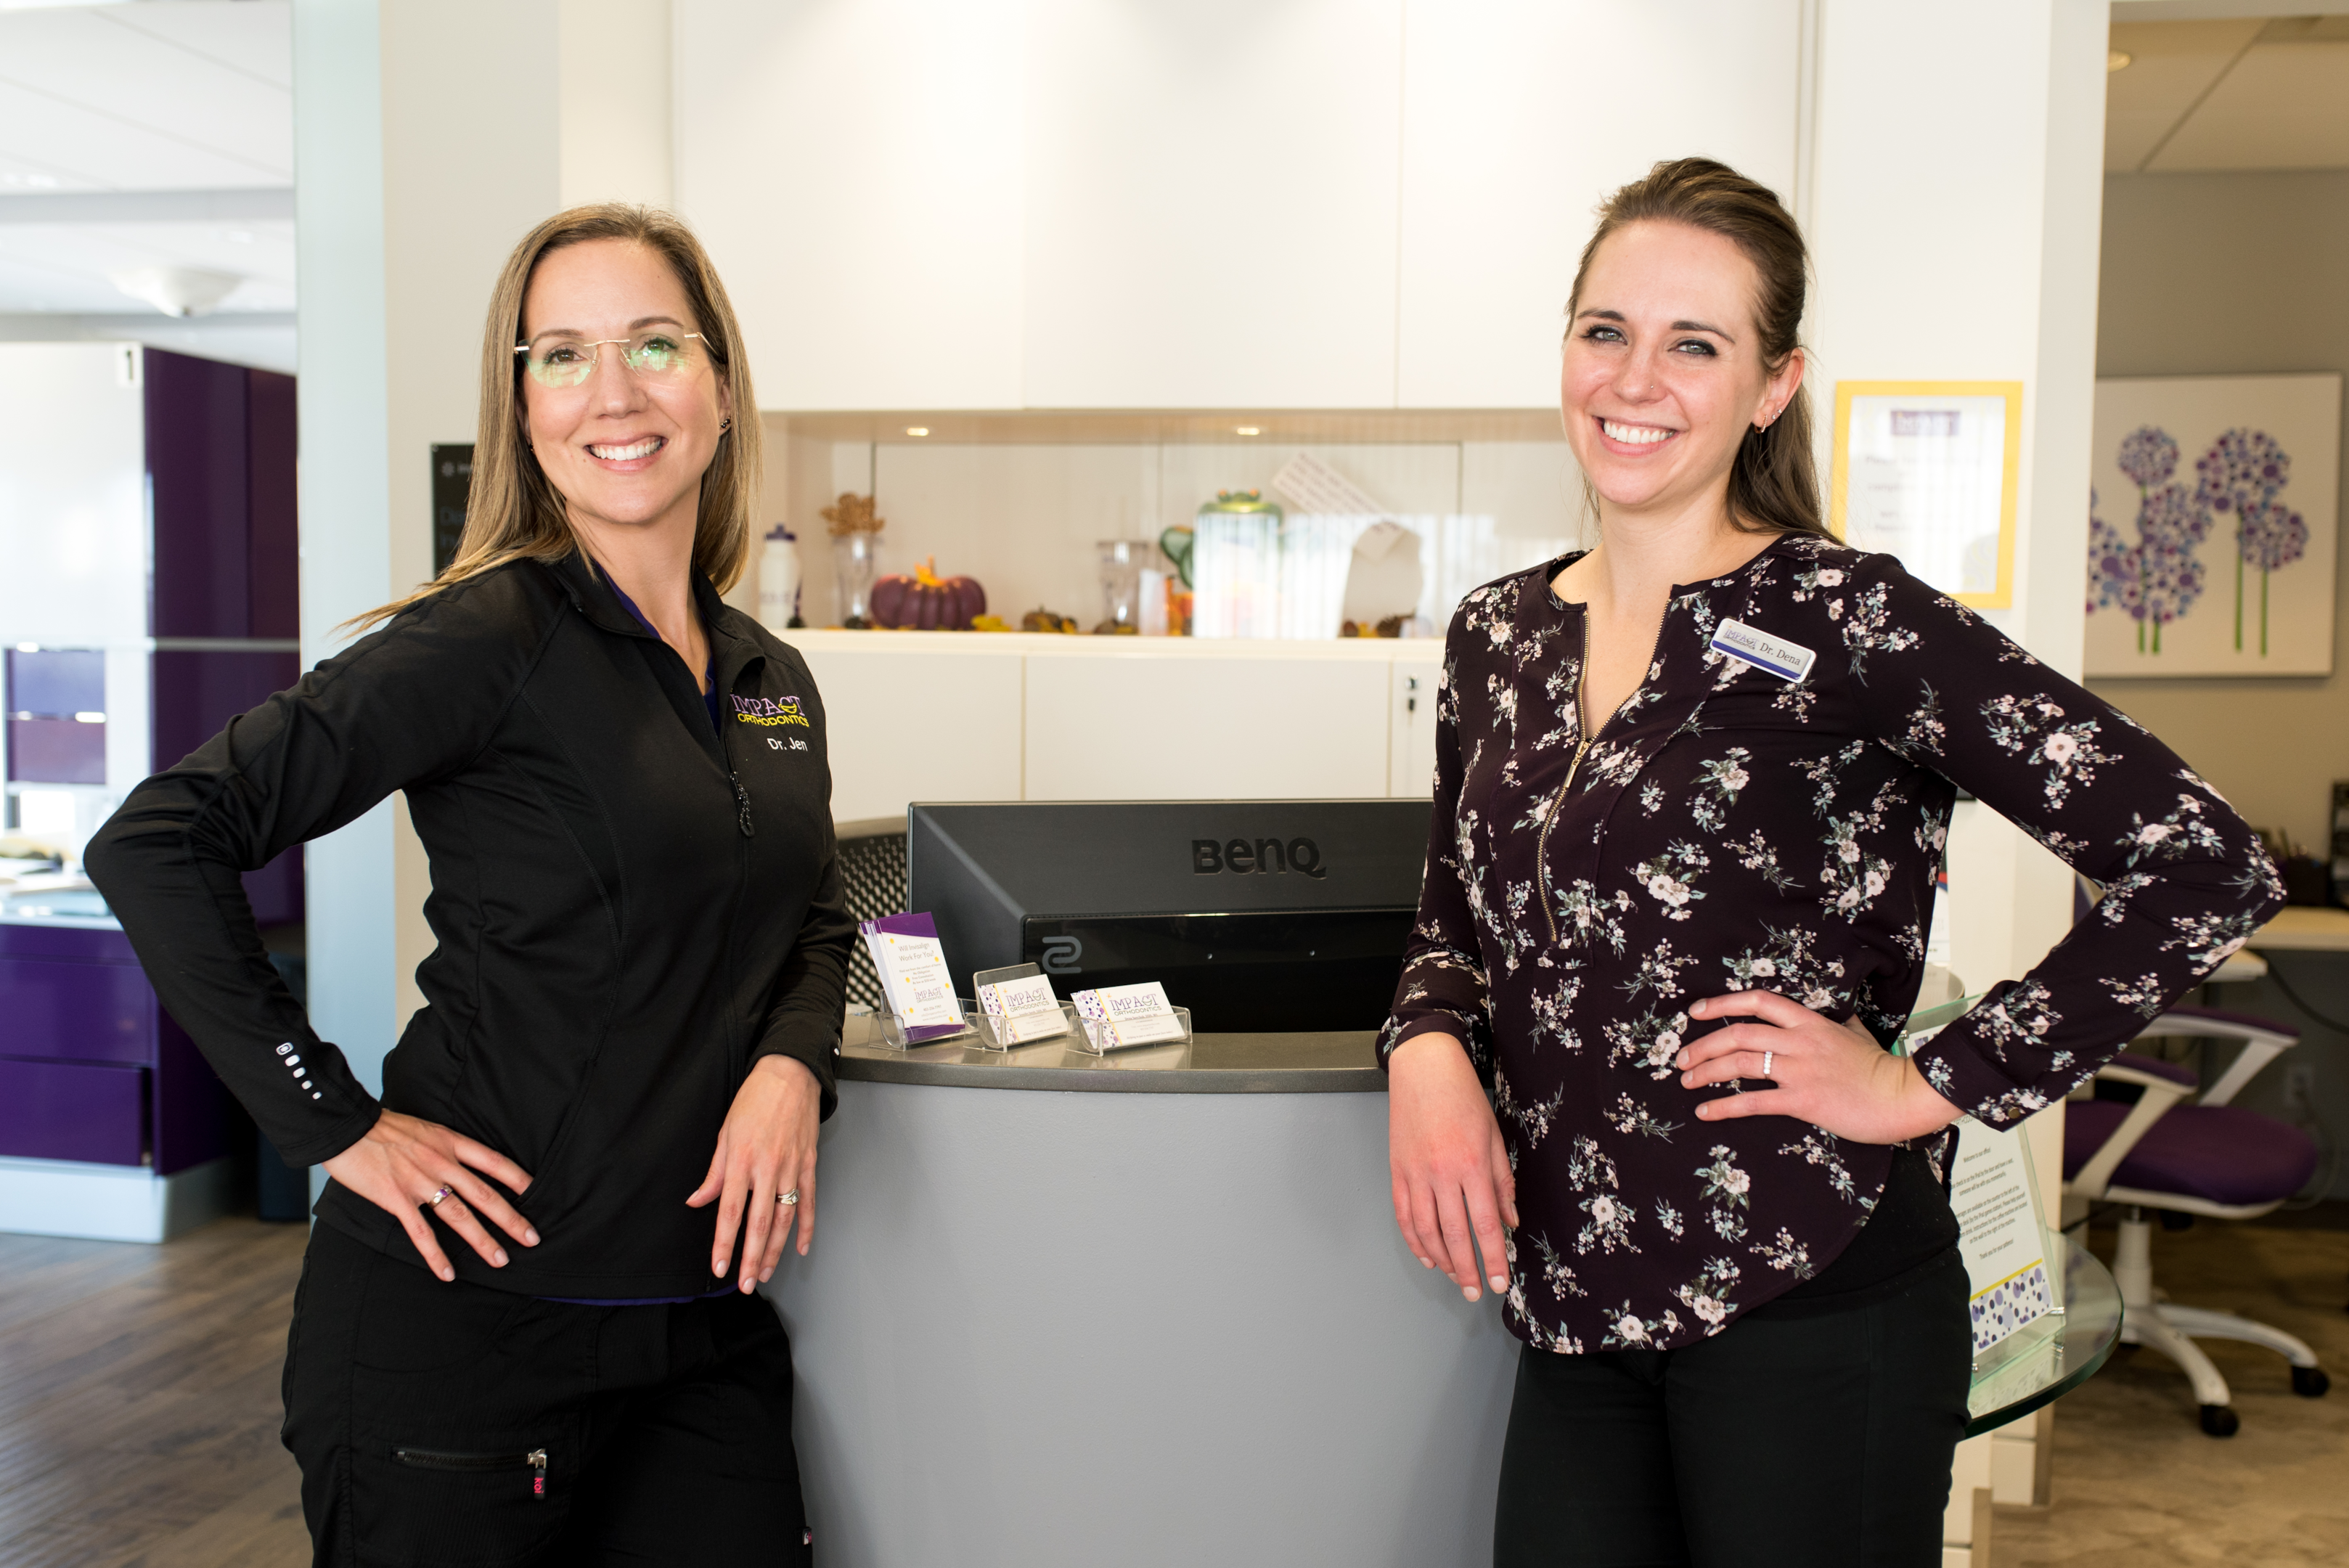 Dr. Jen and Dr. Dena want you to have a healthy dental facial relationship